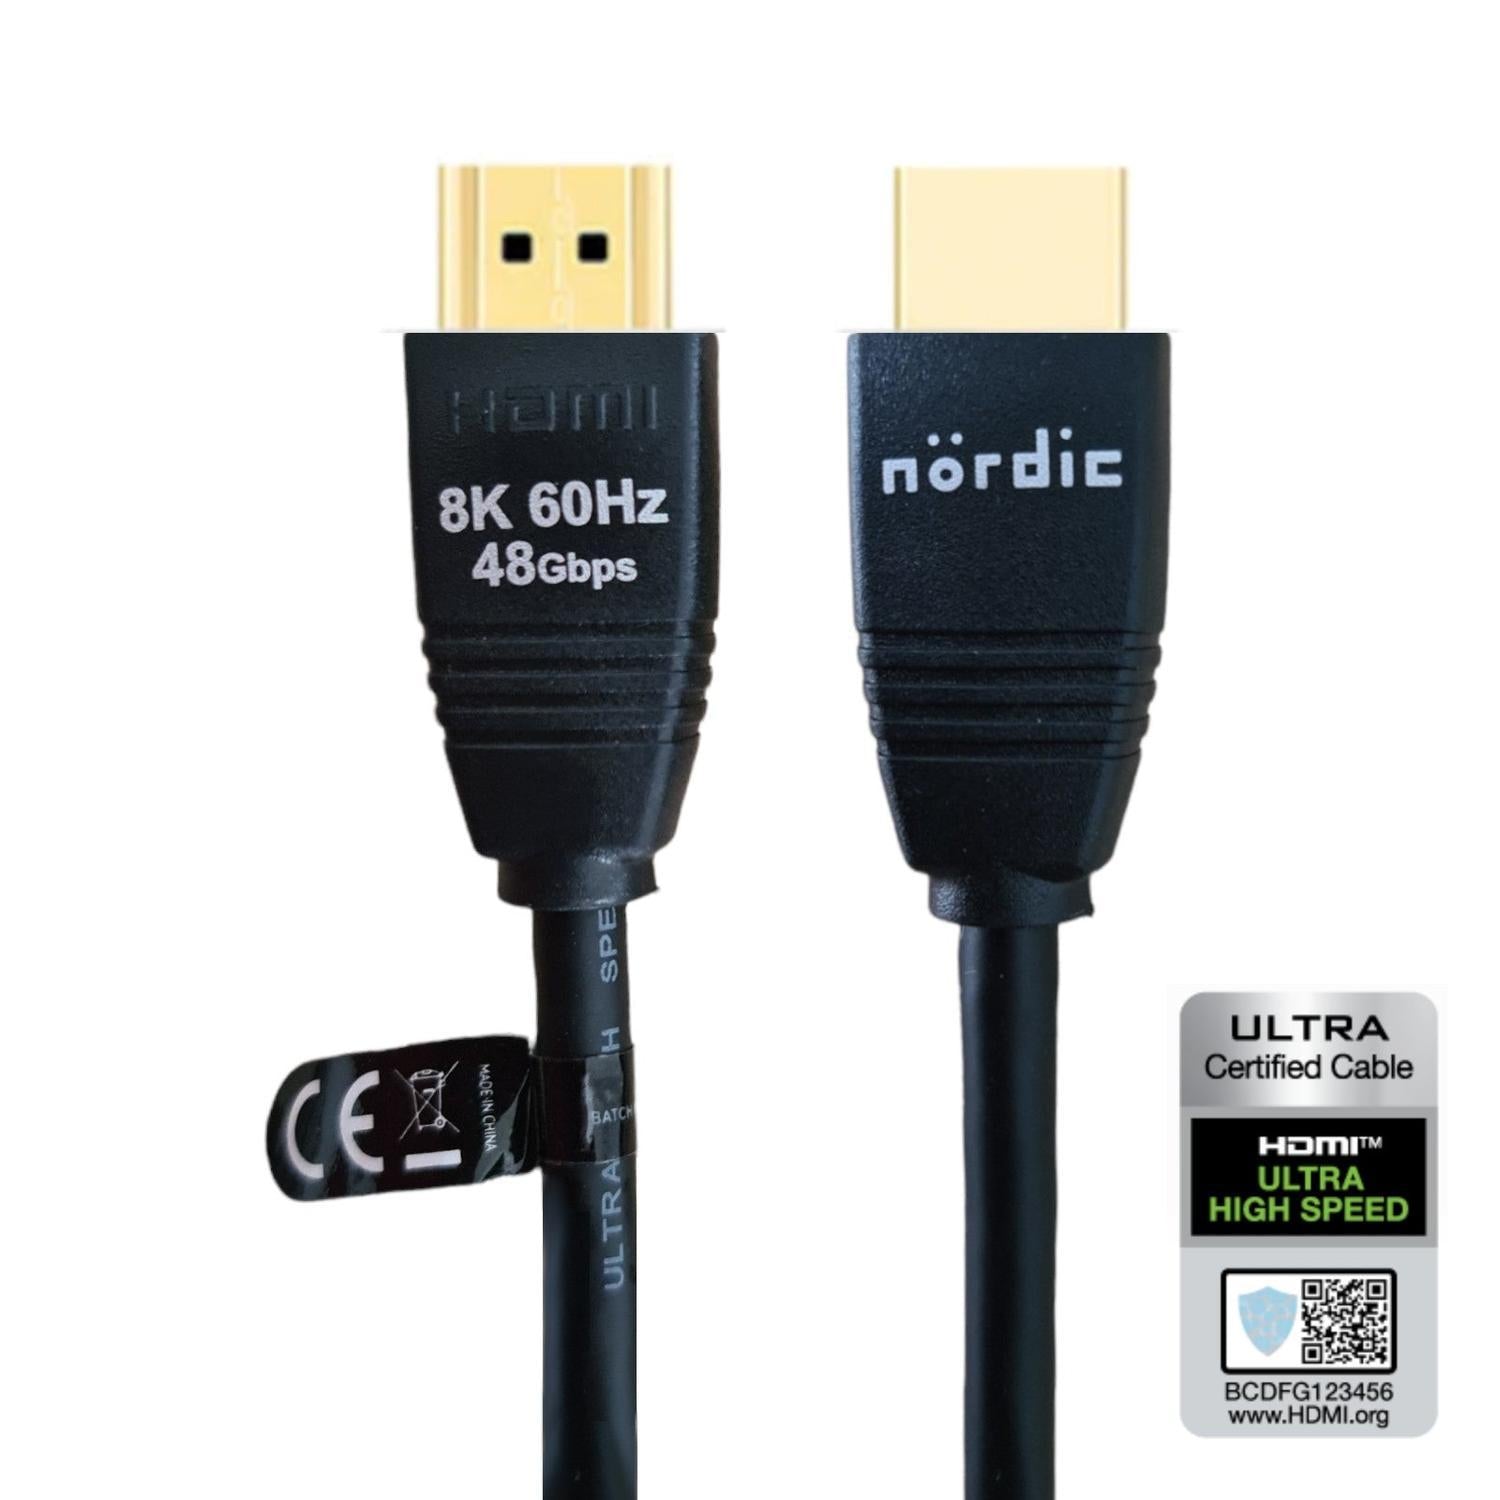 NORDIC CERTIFIED CABLES 2m Ultra High Speed HDMI2.1 8K 60Hz 4K 120Hz 144Hz 48Gbps Dynamic HDR eARC Game Mode VRR Dolby ATMOS guldbelagt PVC sort